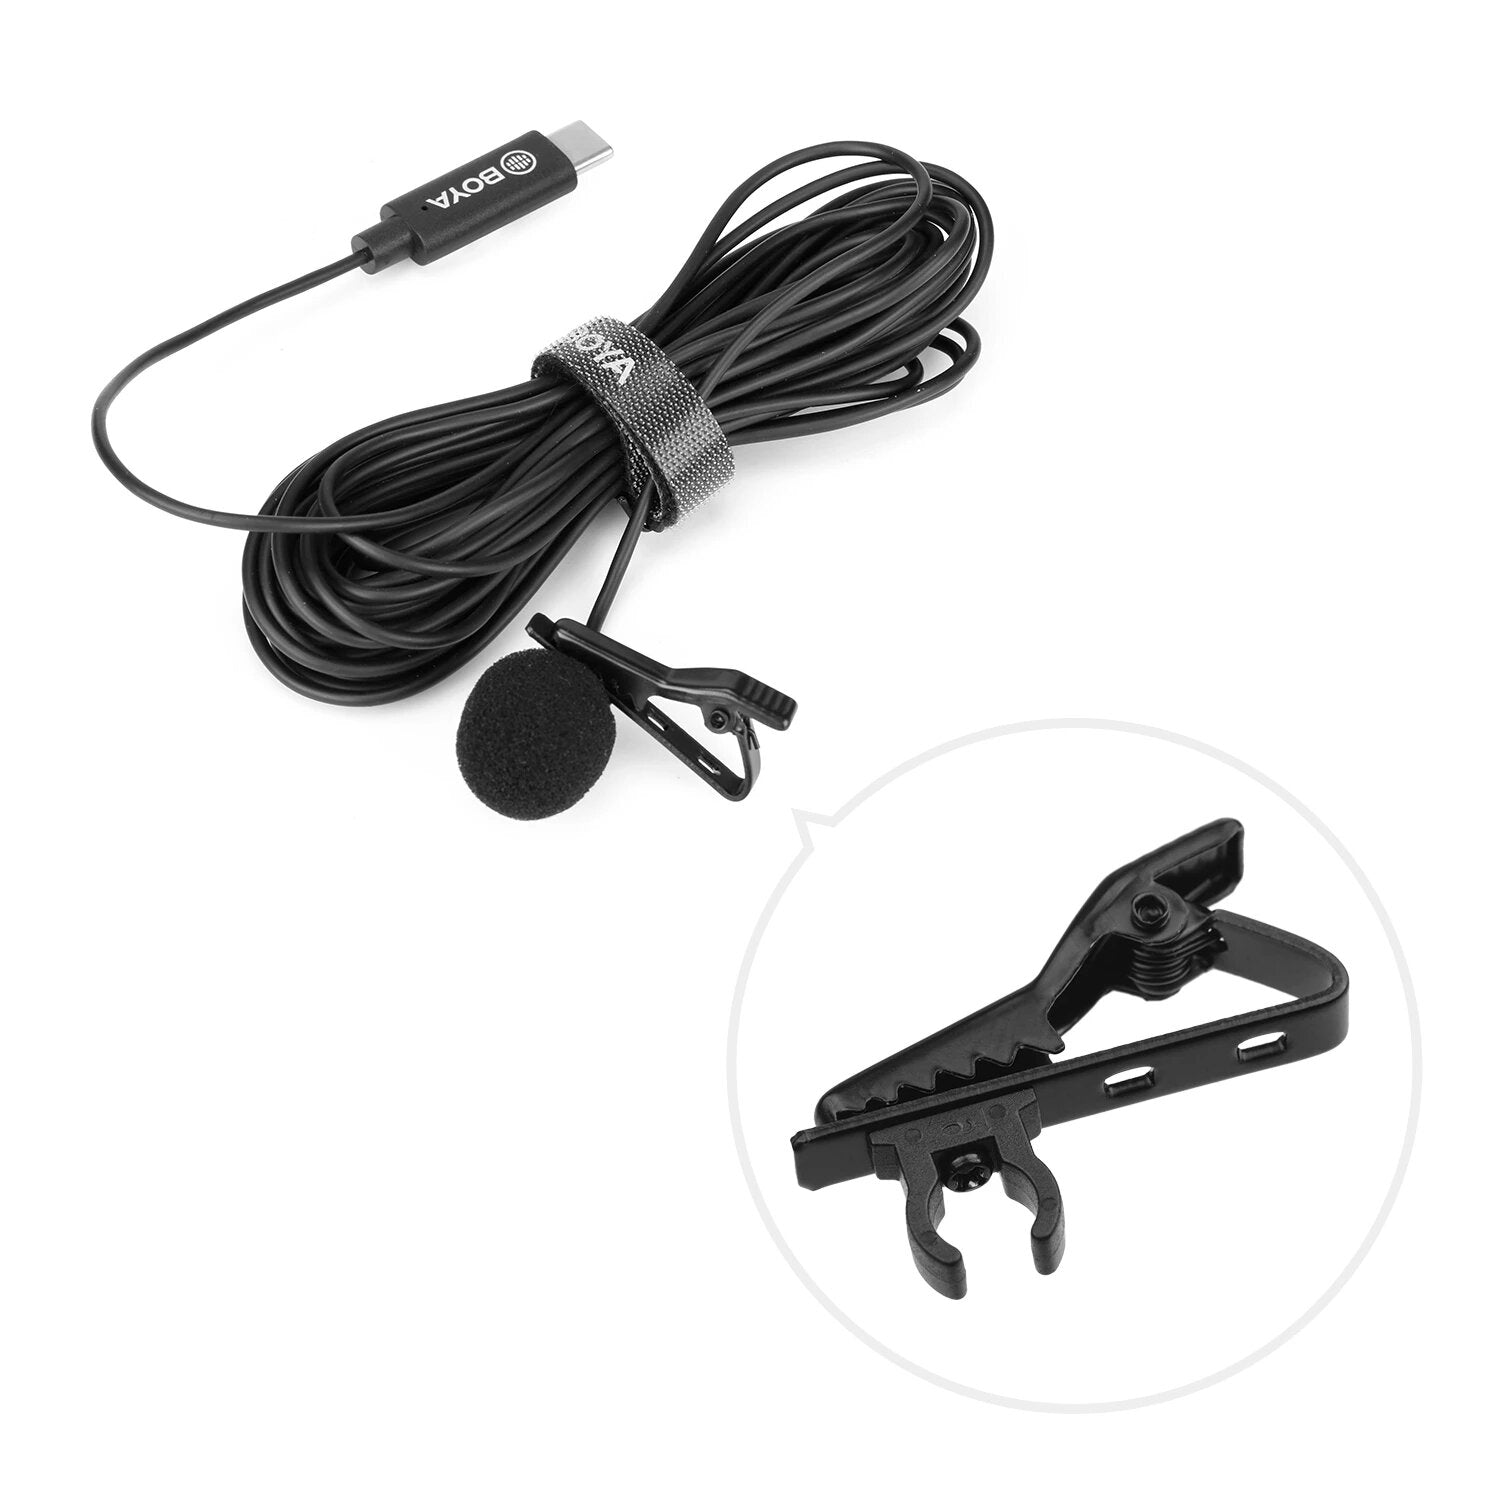 Lavalier Lapel Microphone Mini Mic Omnidirectional Single Head 6 Meters Cable for USB Type-C Devise Android Smartphone for iPad Pro,for Mac Computer